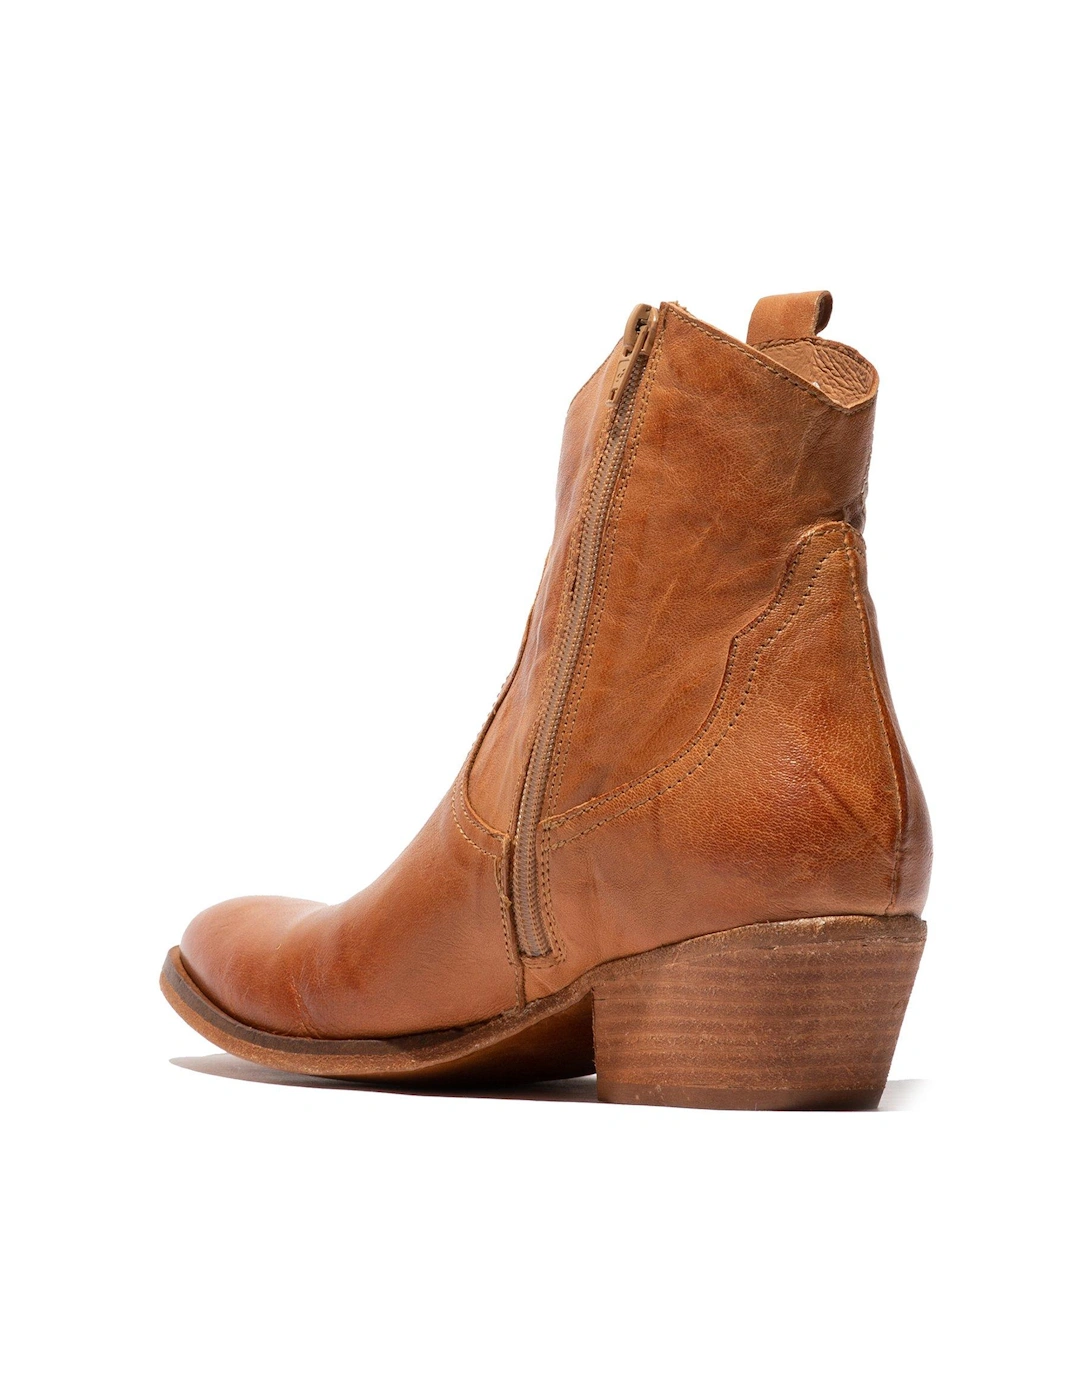 Wami Leather Ankle Western Boots - Camel